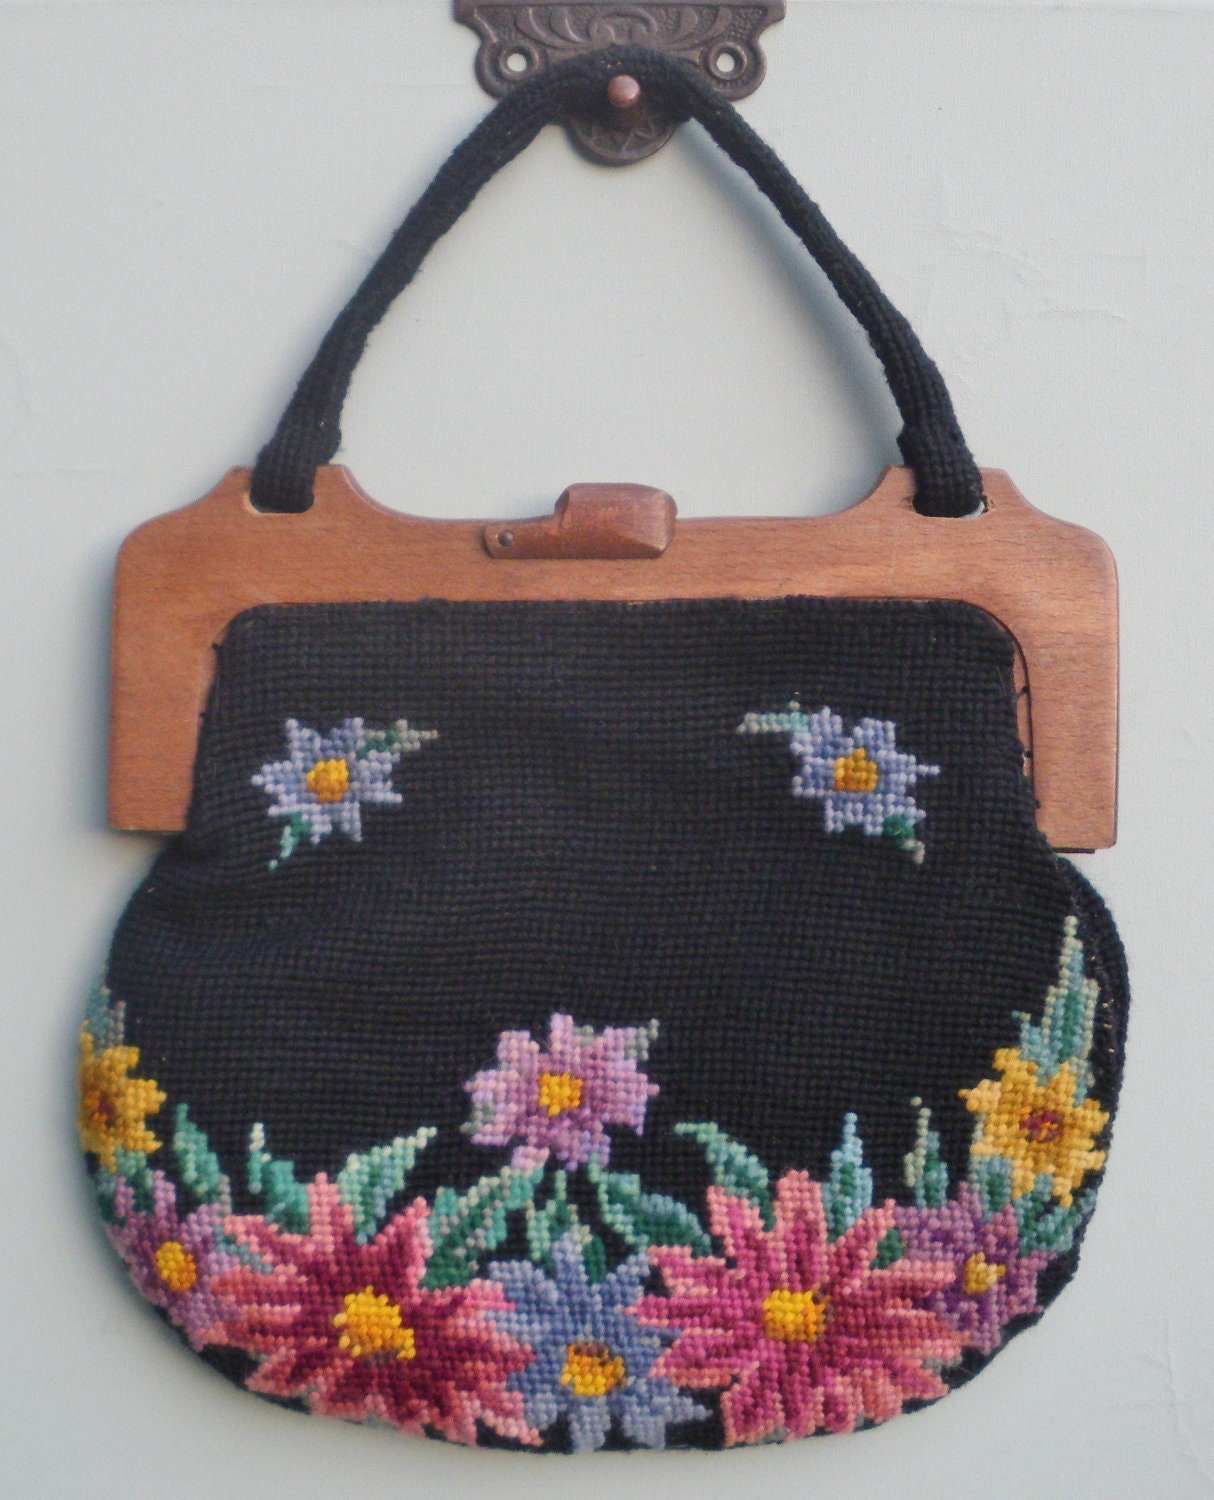 Vintage Lined Needlepoint Cloth Bag with Wooden Handles, Sewing, Crochet